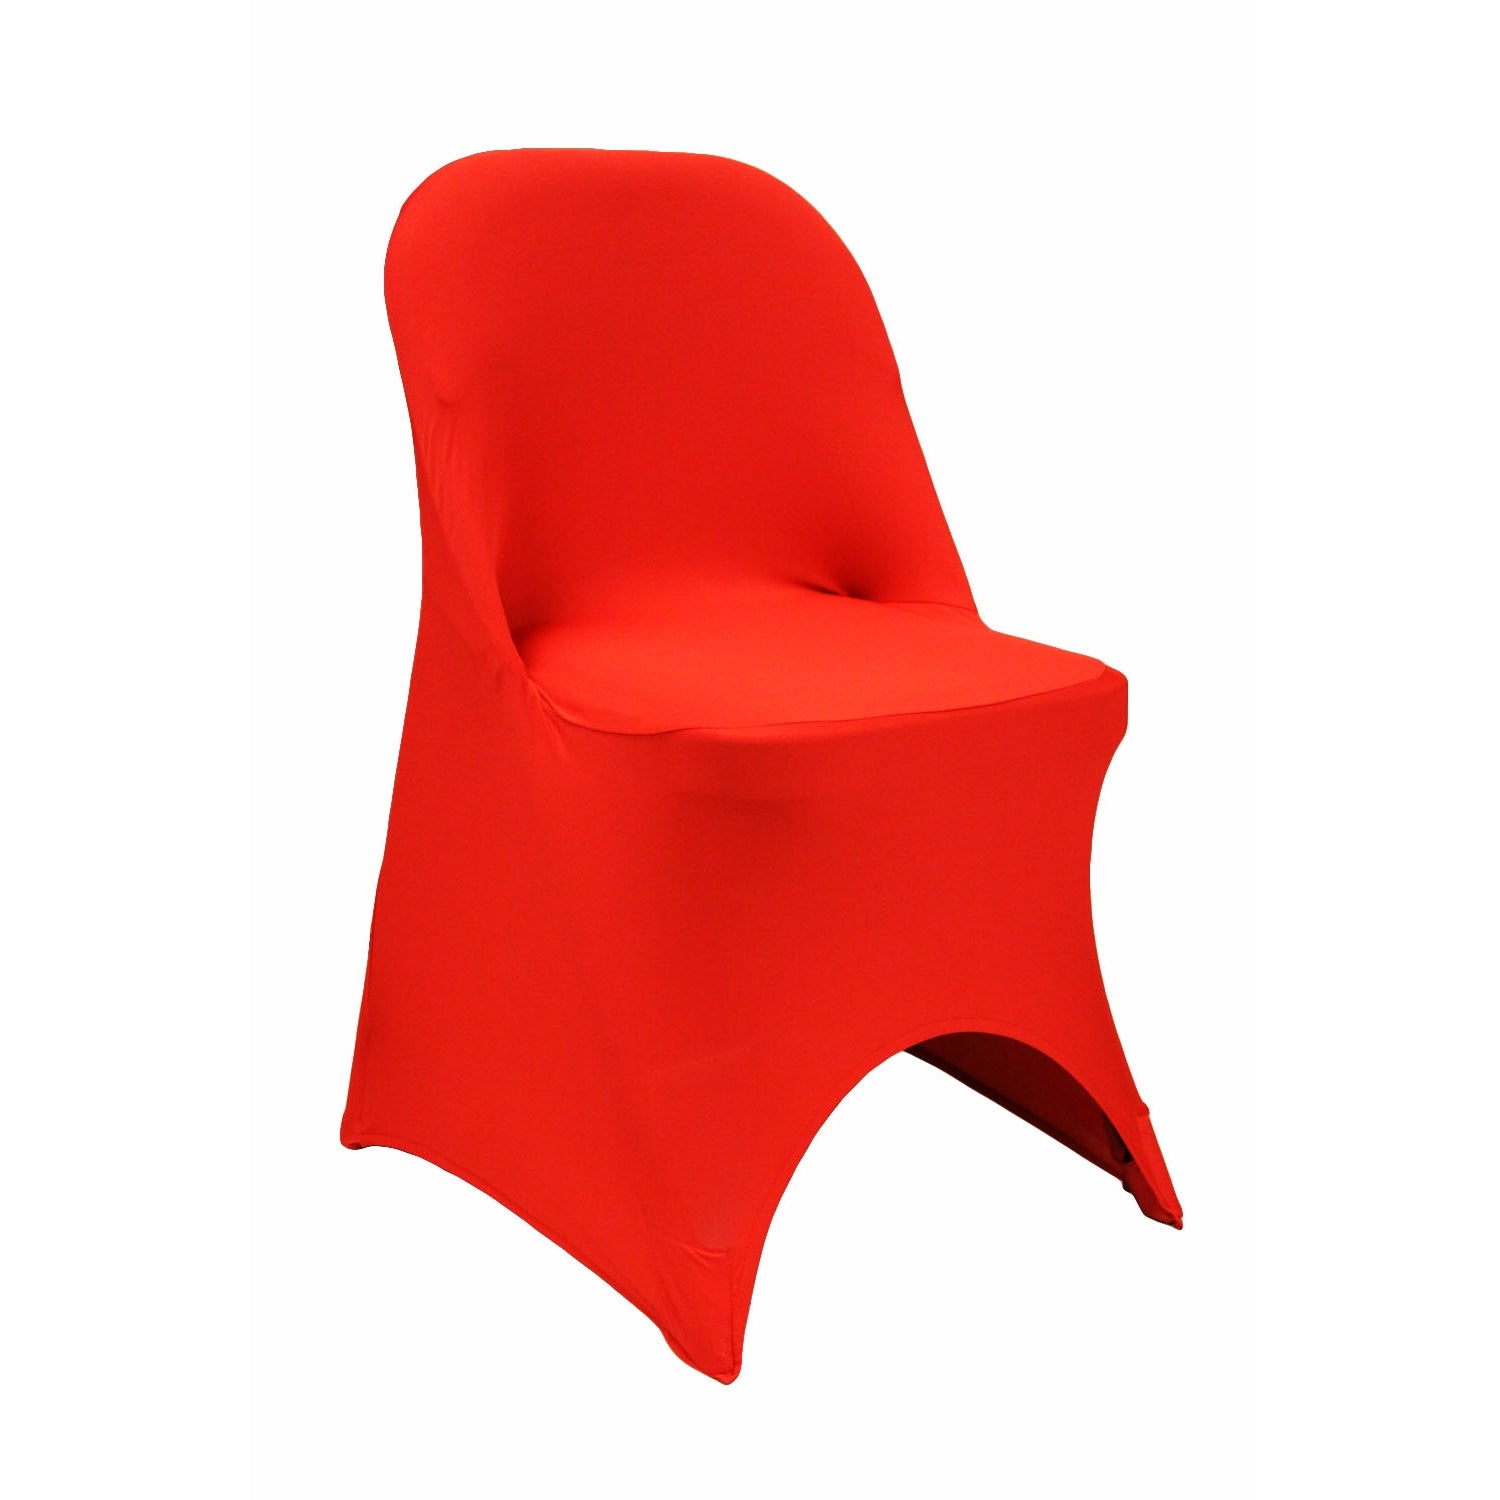 Folding Spandex Chair Cover - Red - CV Linens